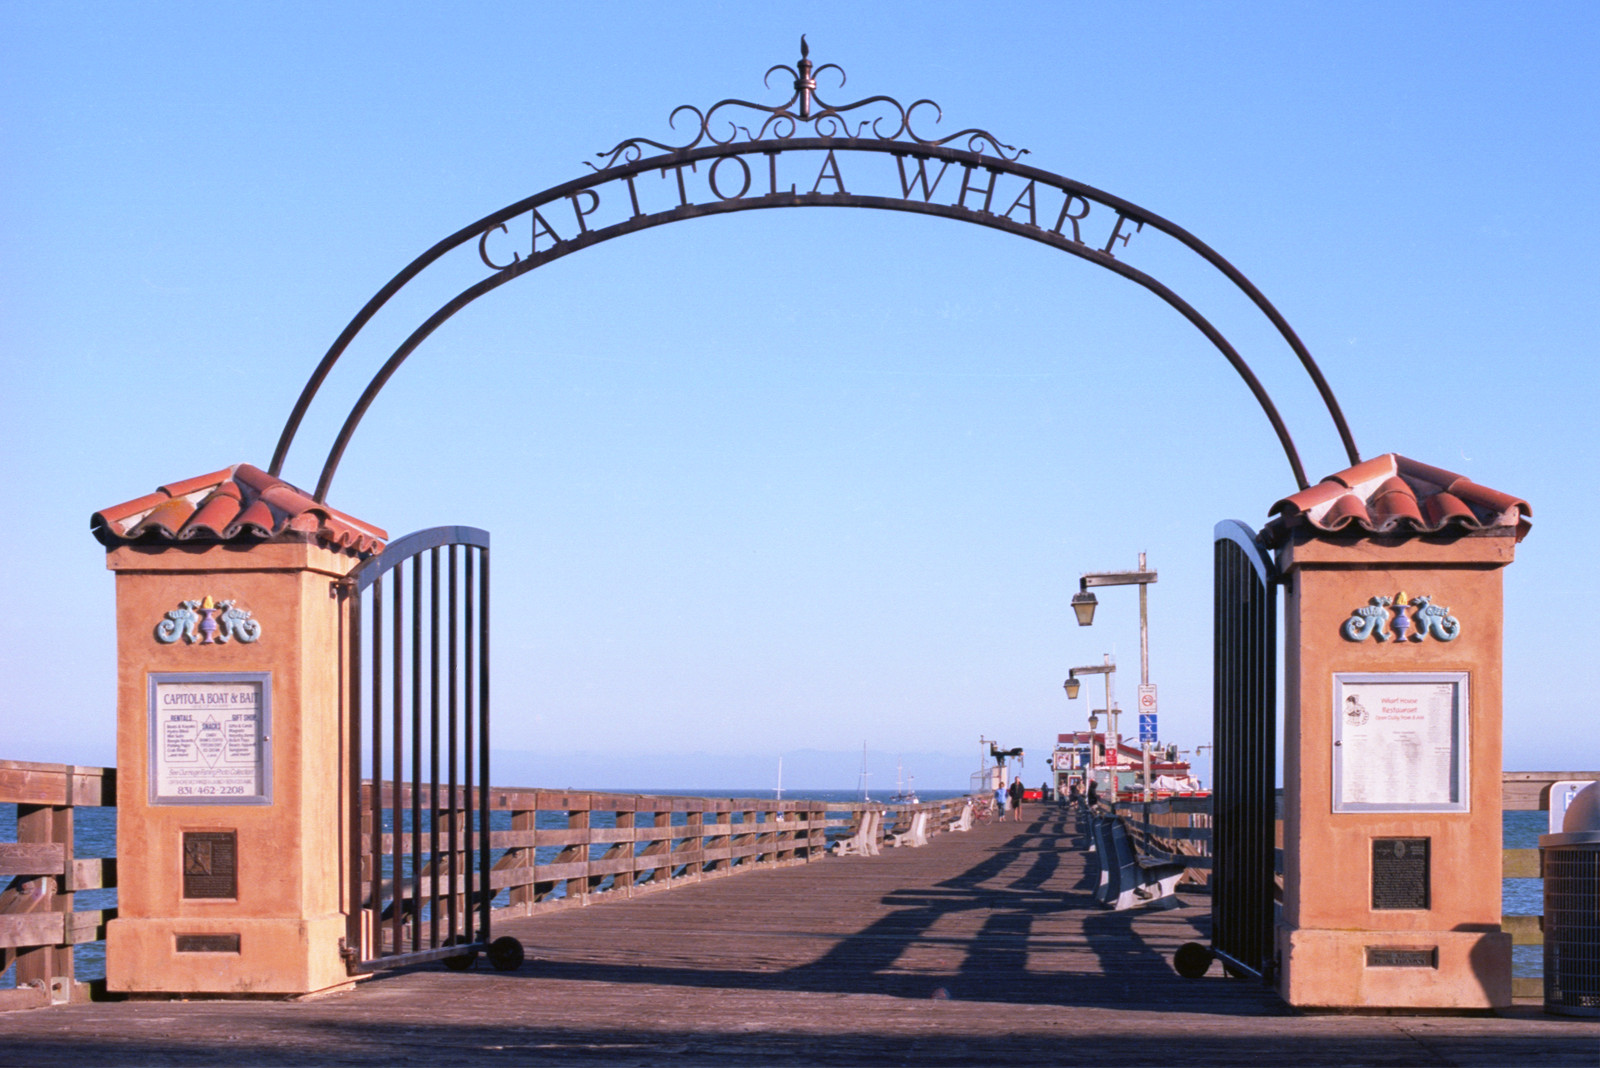 Gate to the Capitola Wharf - rising from two square towers with pointed tile tops, a nice wrought-iron arch over the planks; in the distance, the wooden buildings at the end of the dock. The ocean-sky horizon sea-green below and blue above.